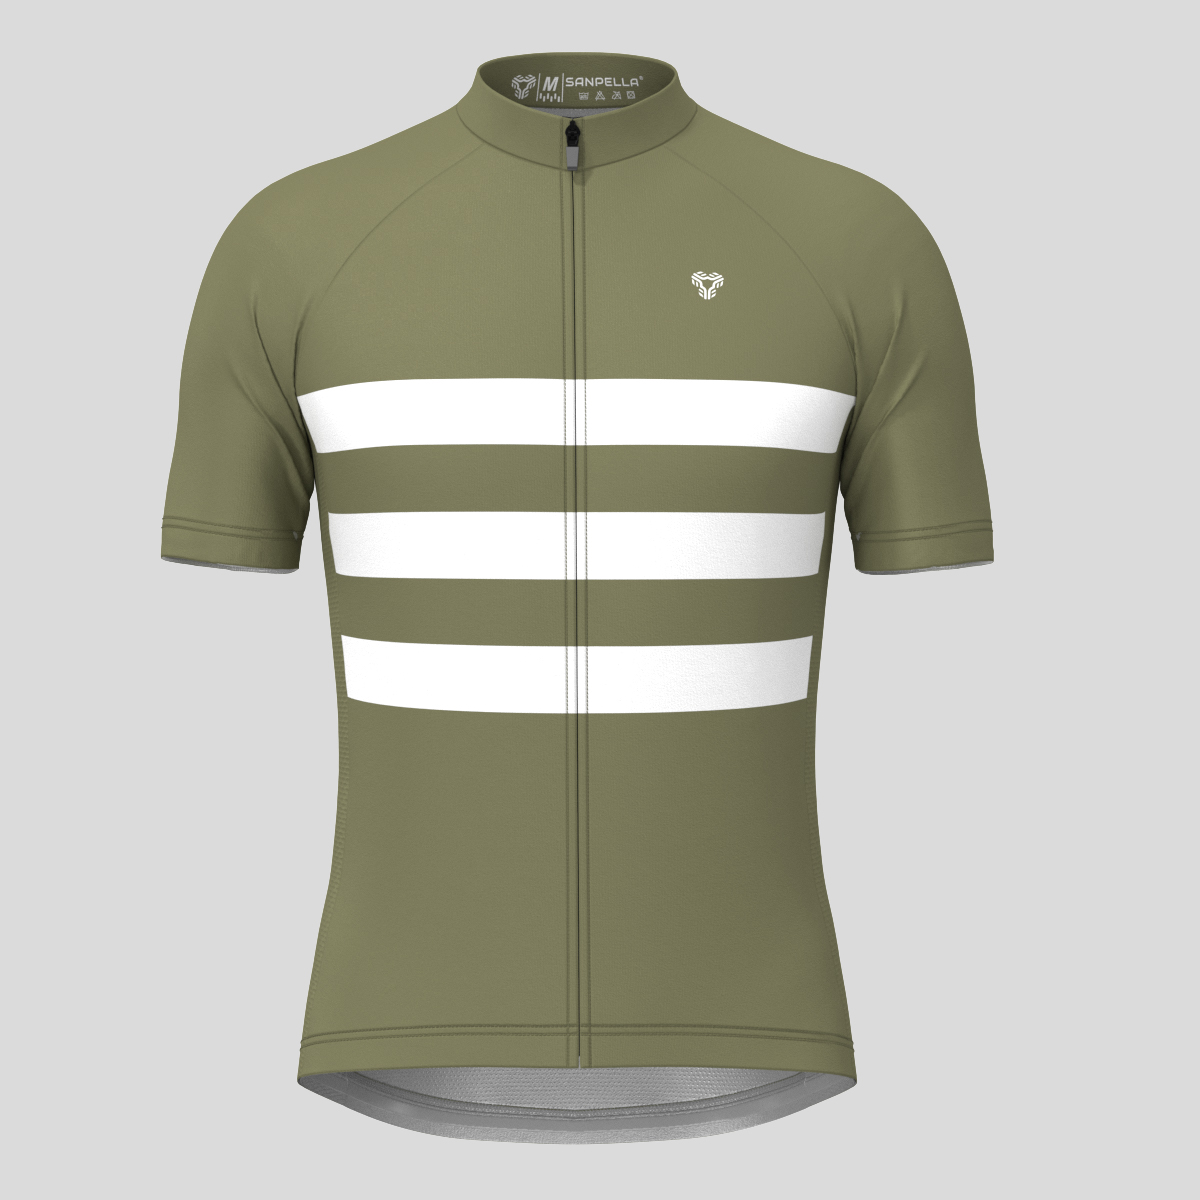 Men's Classic Stripes Cycling Jersey - Olive